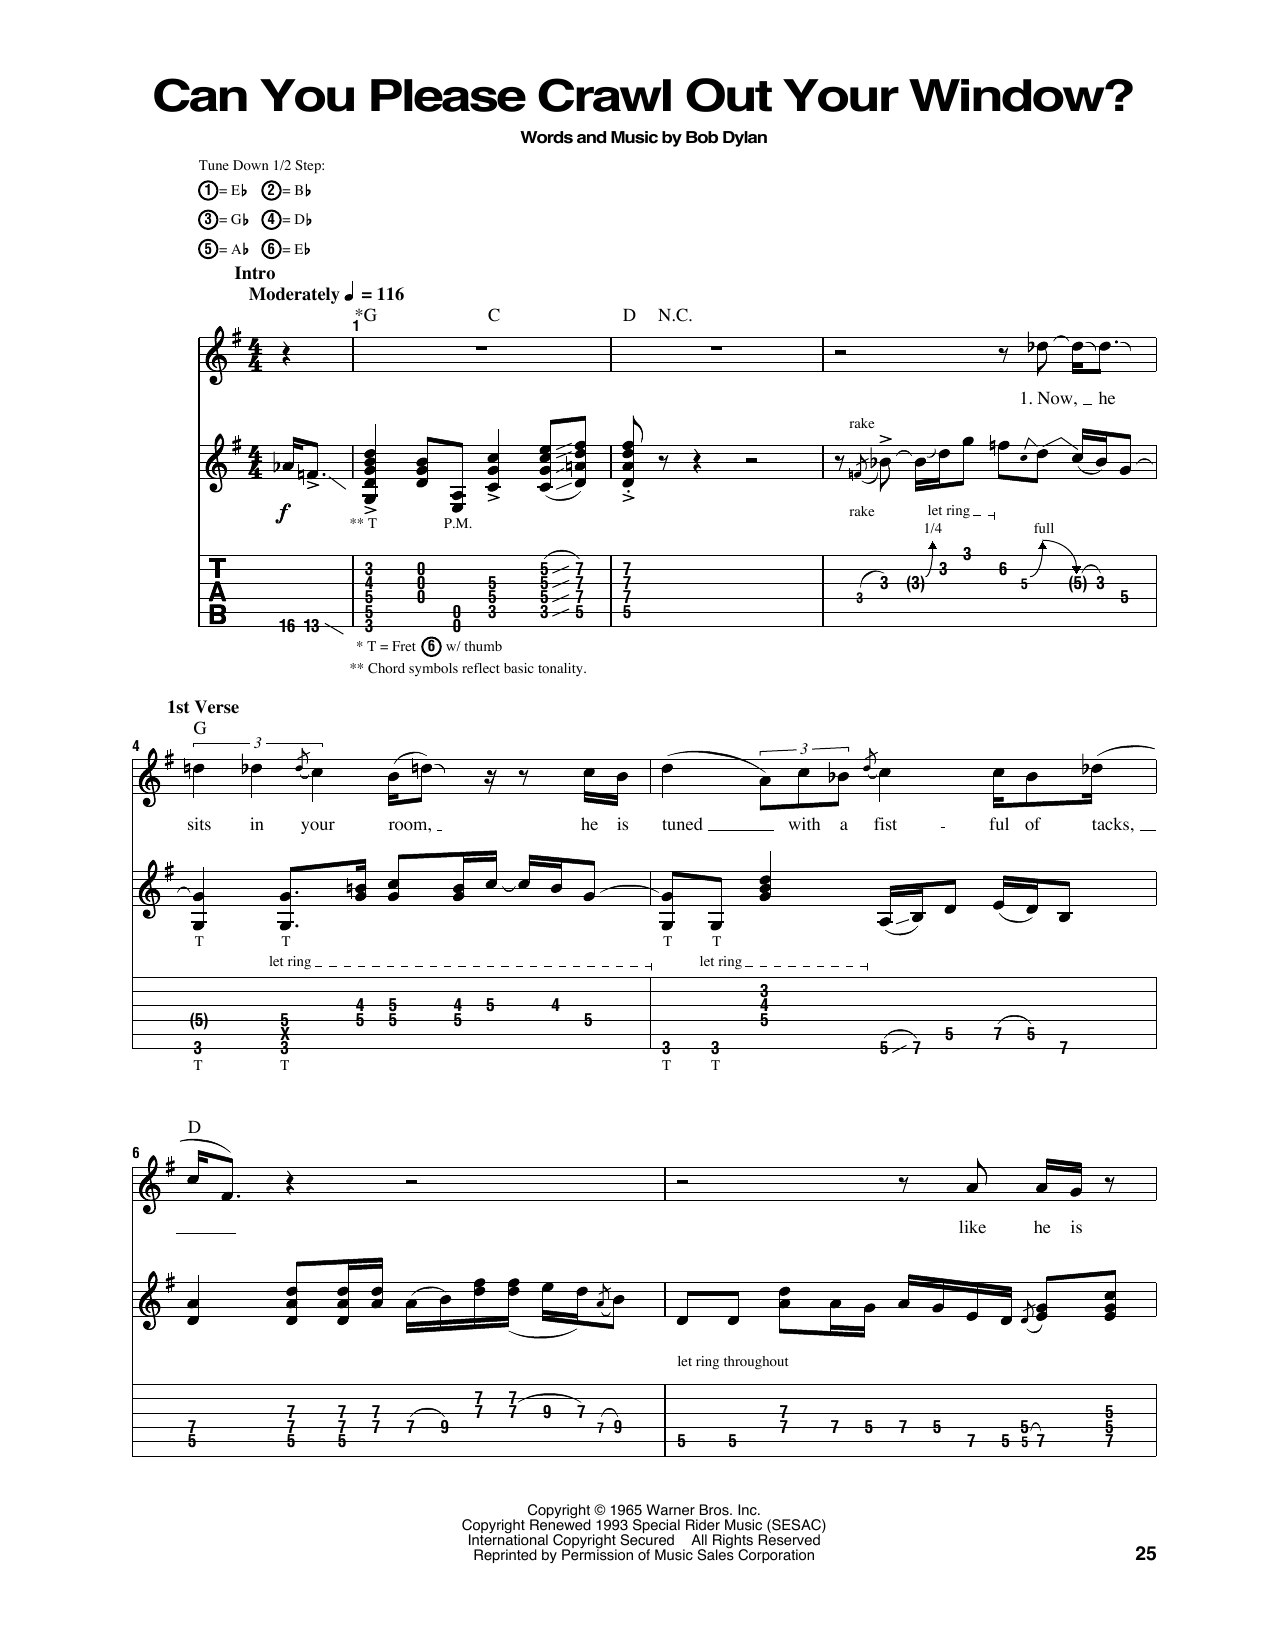 Download Jimi Hendrix Can You Please Crawl Out Your Window? Sheet Music